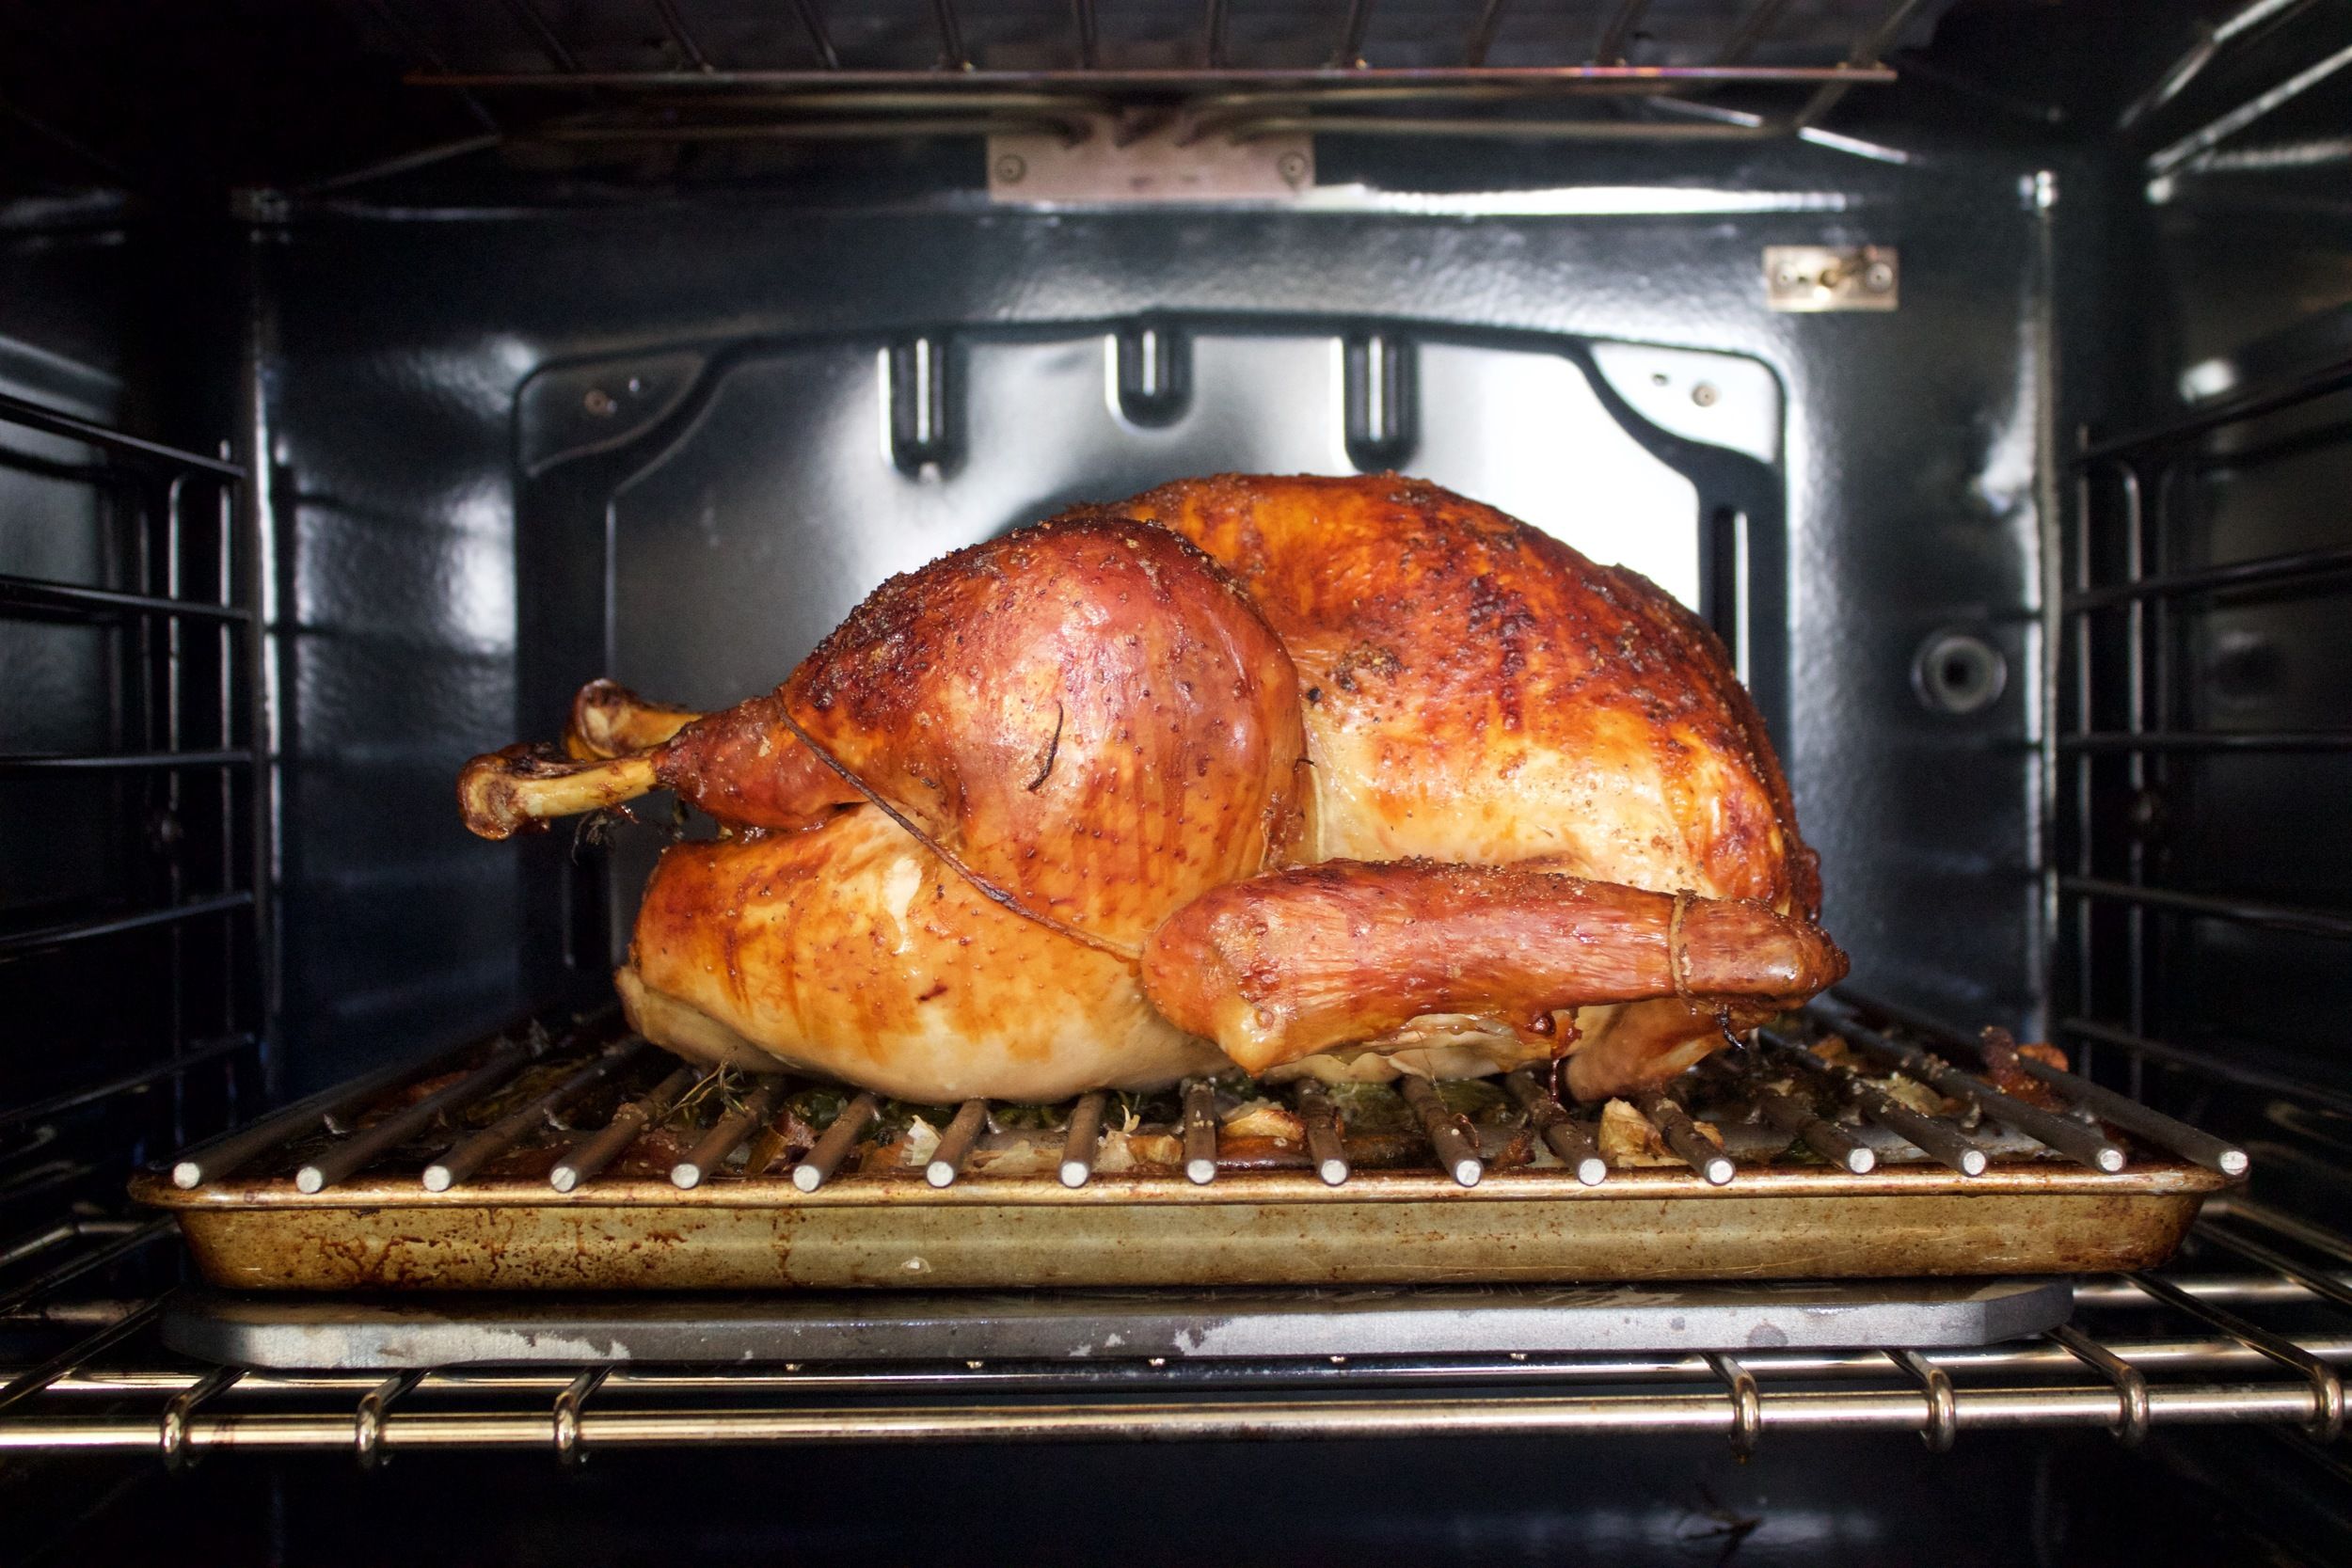 How To Cook Turkey In Oven